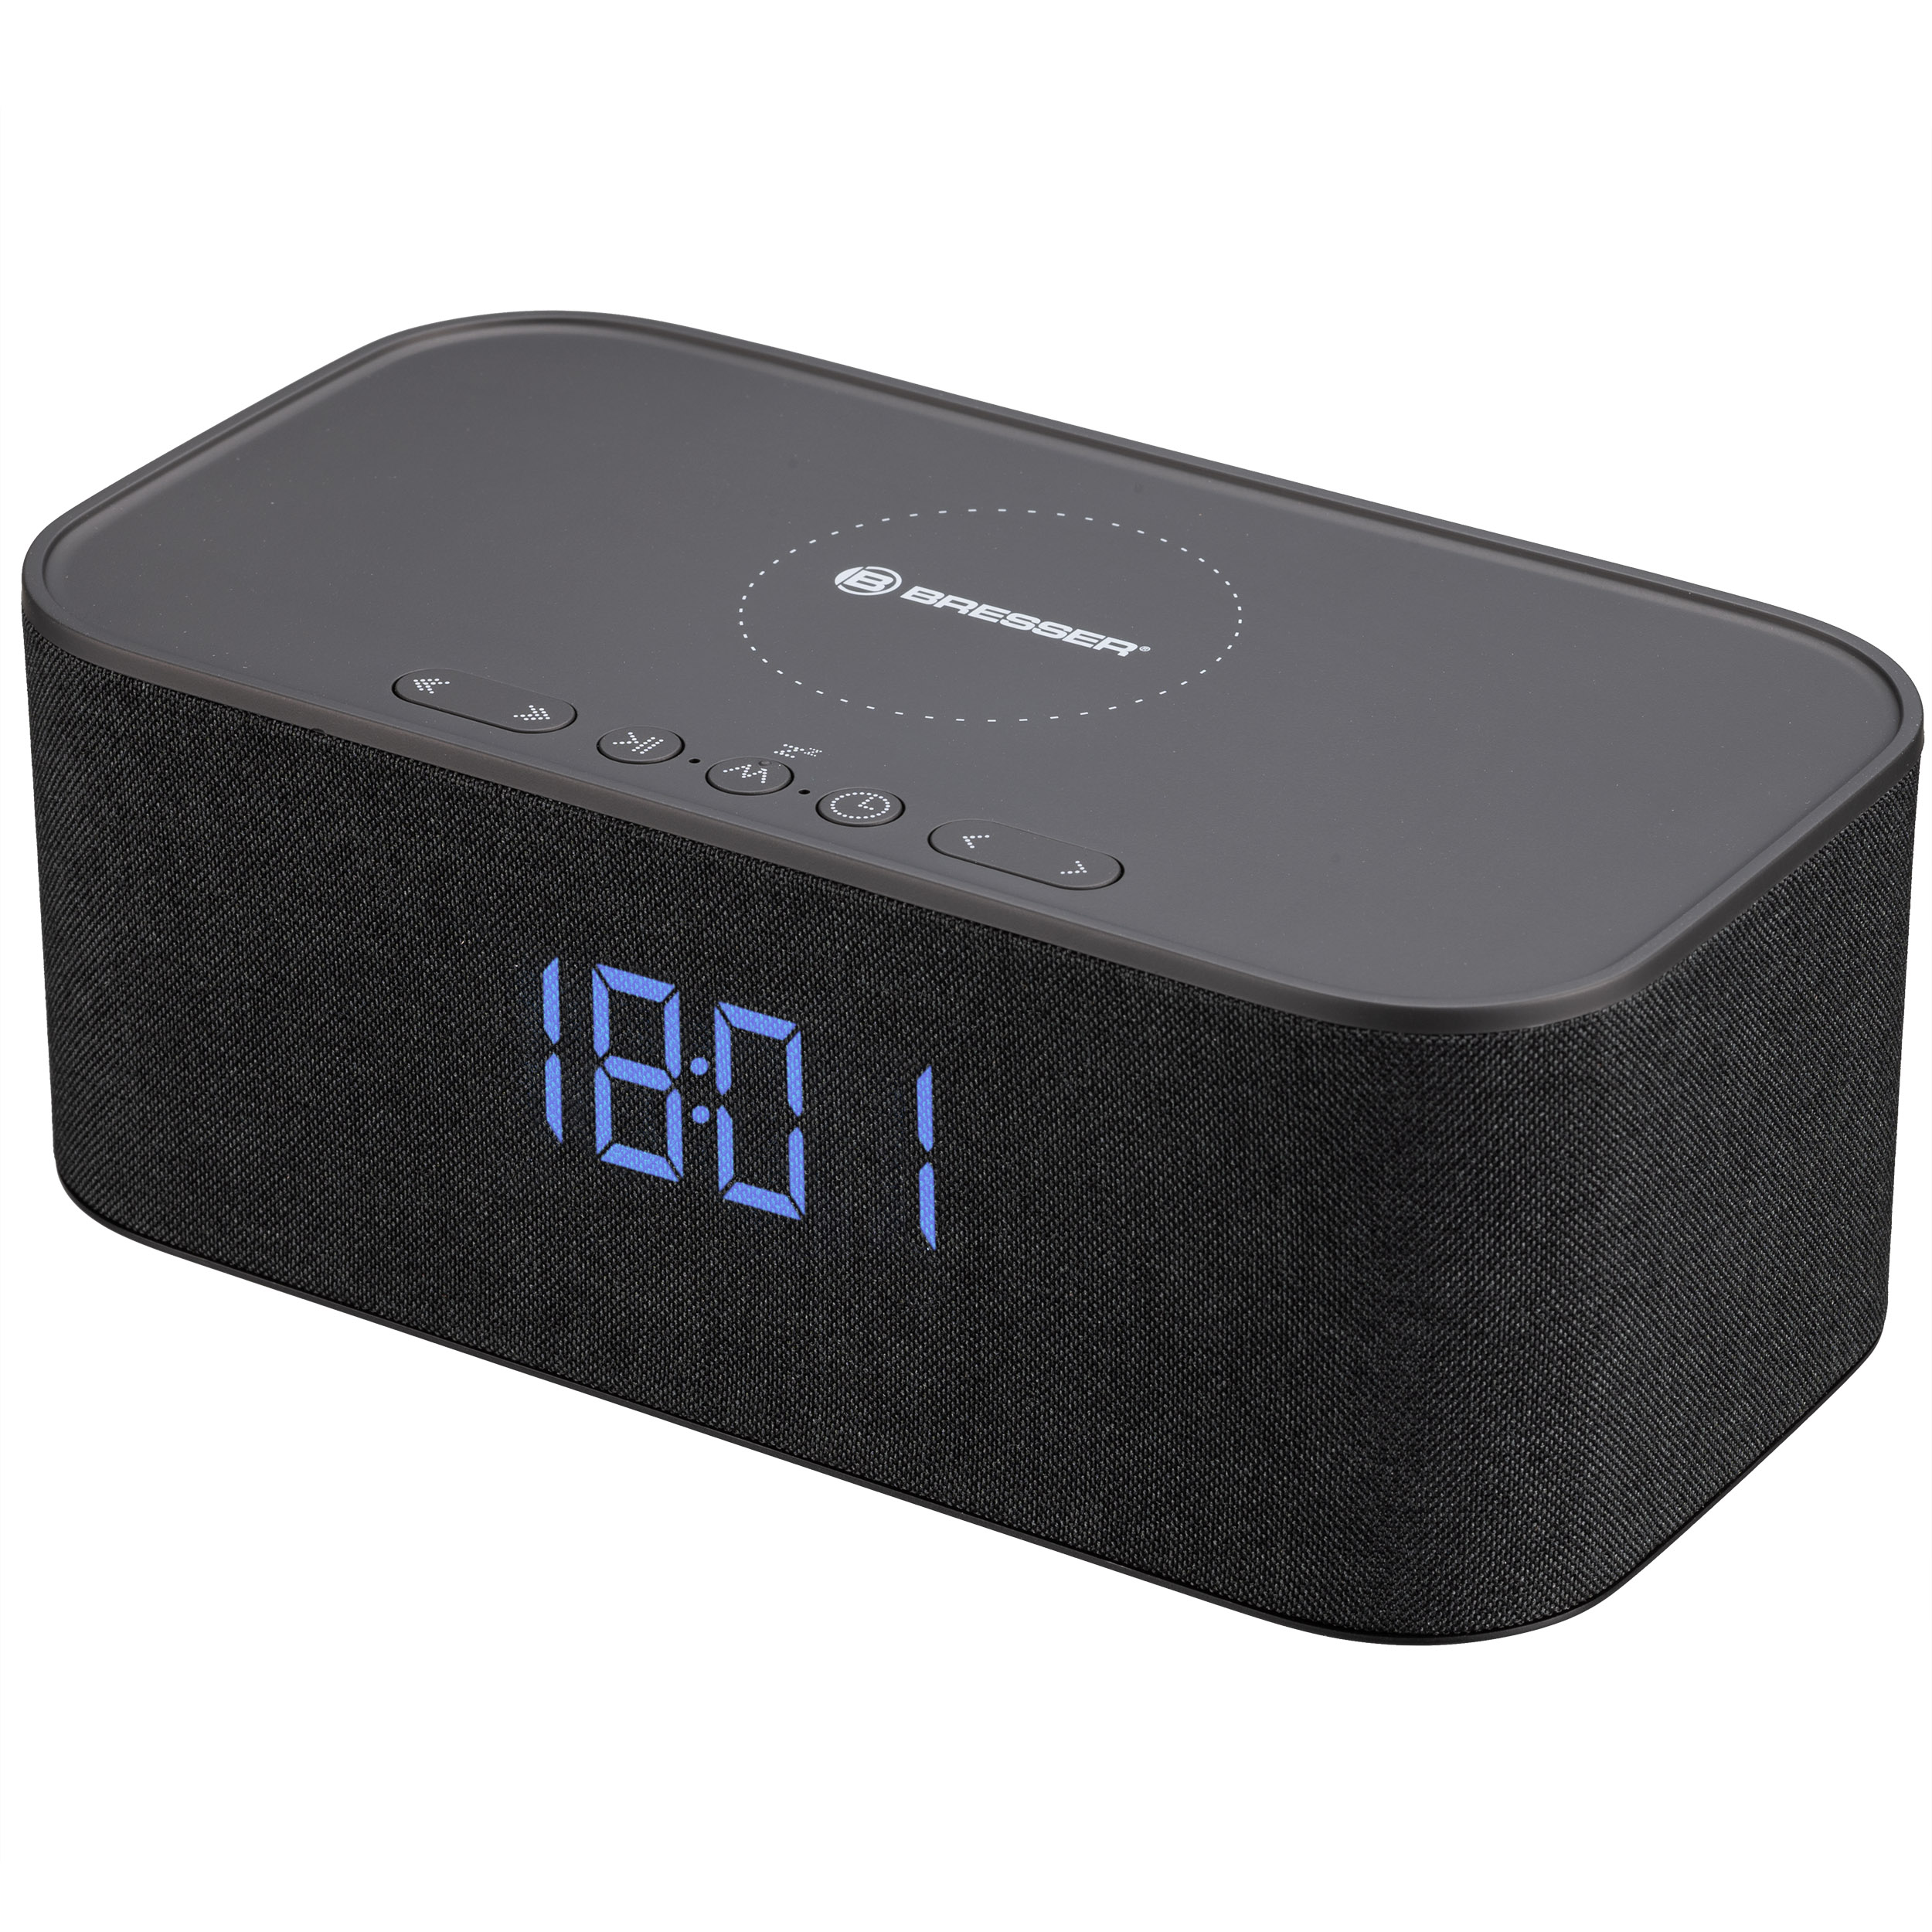 BRESSER Bluetooth speaker with alarm clock and wireless charging function